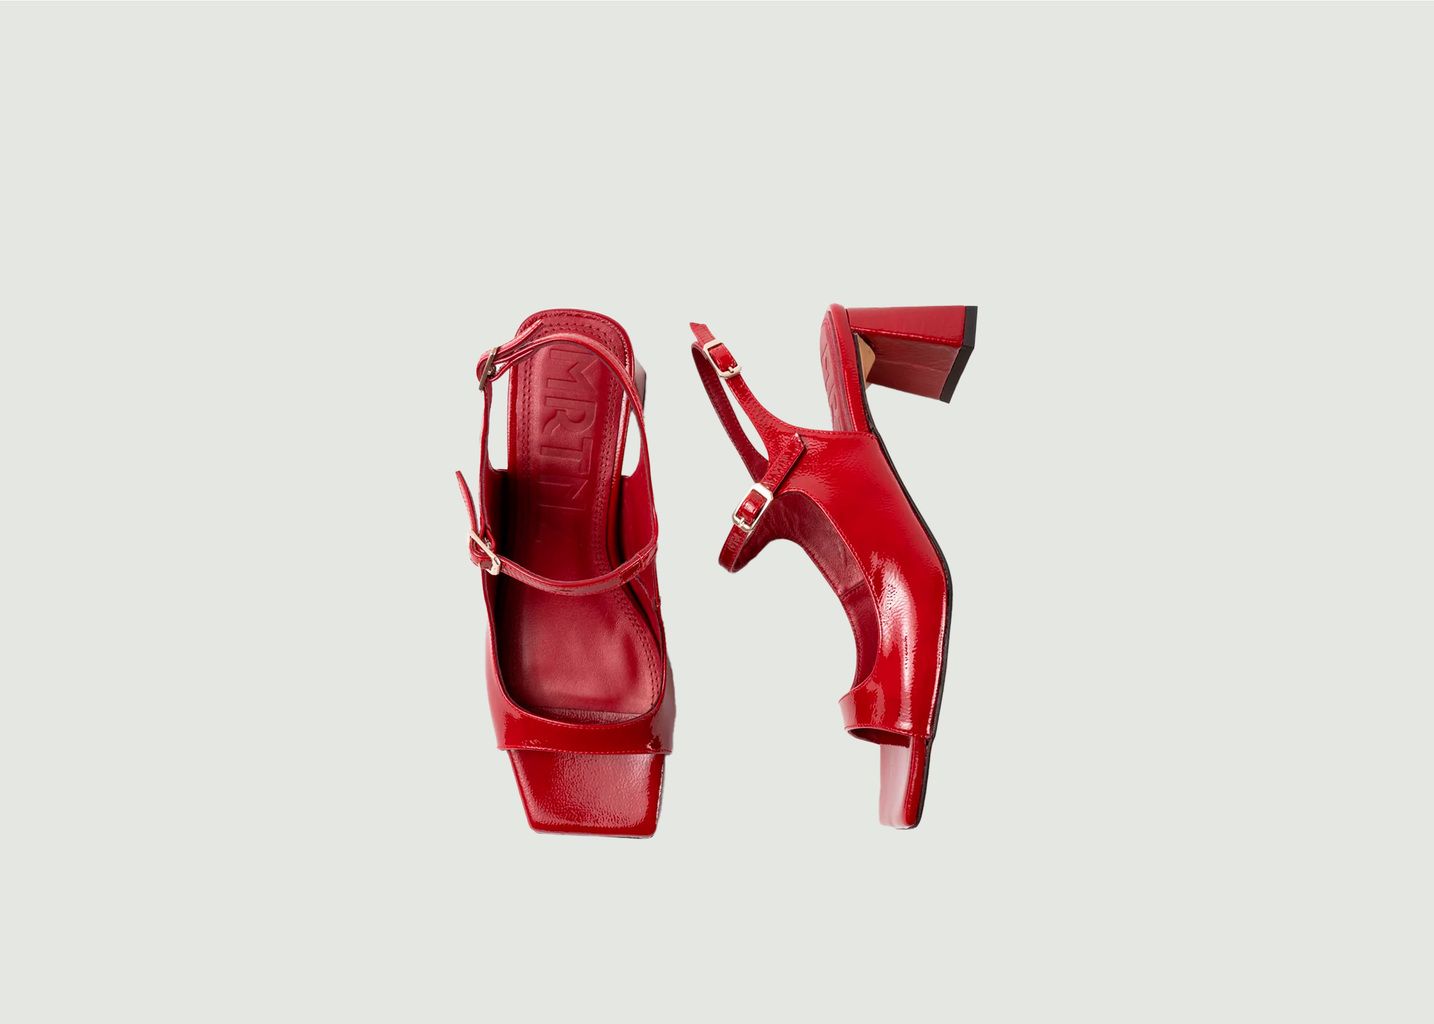 Wrinkled patent leather sandals with Clavel heels - Souliers Martinez